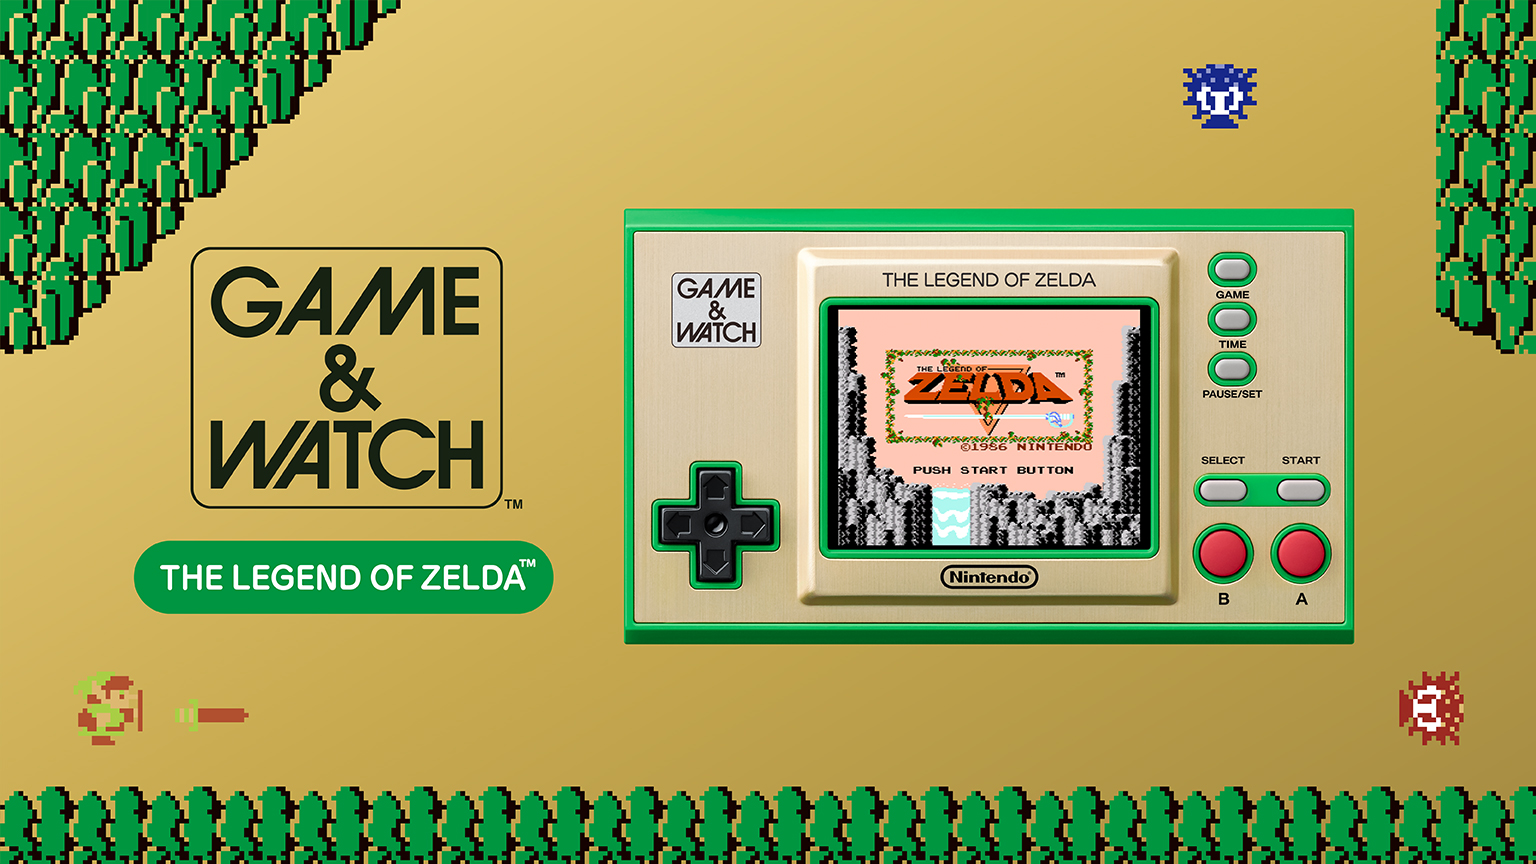 Game & Watch™: The Legend of Zelda™ System